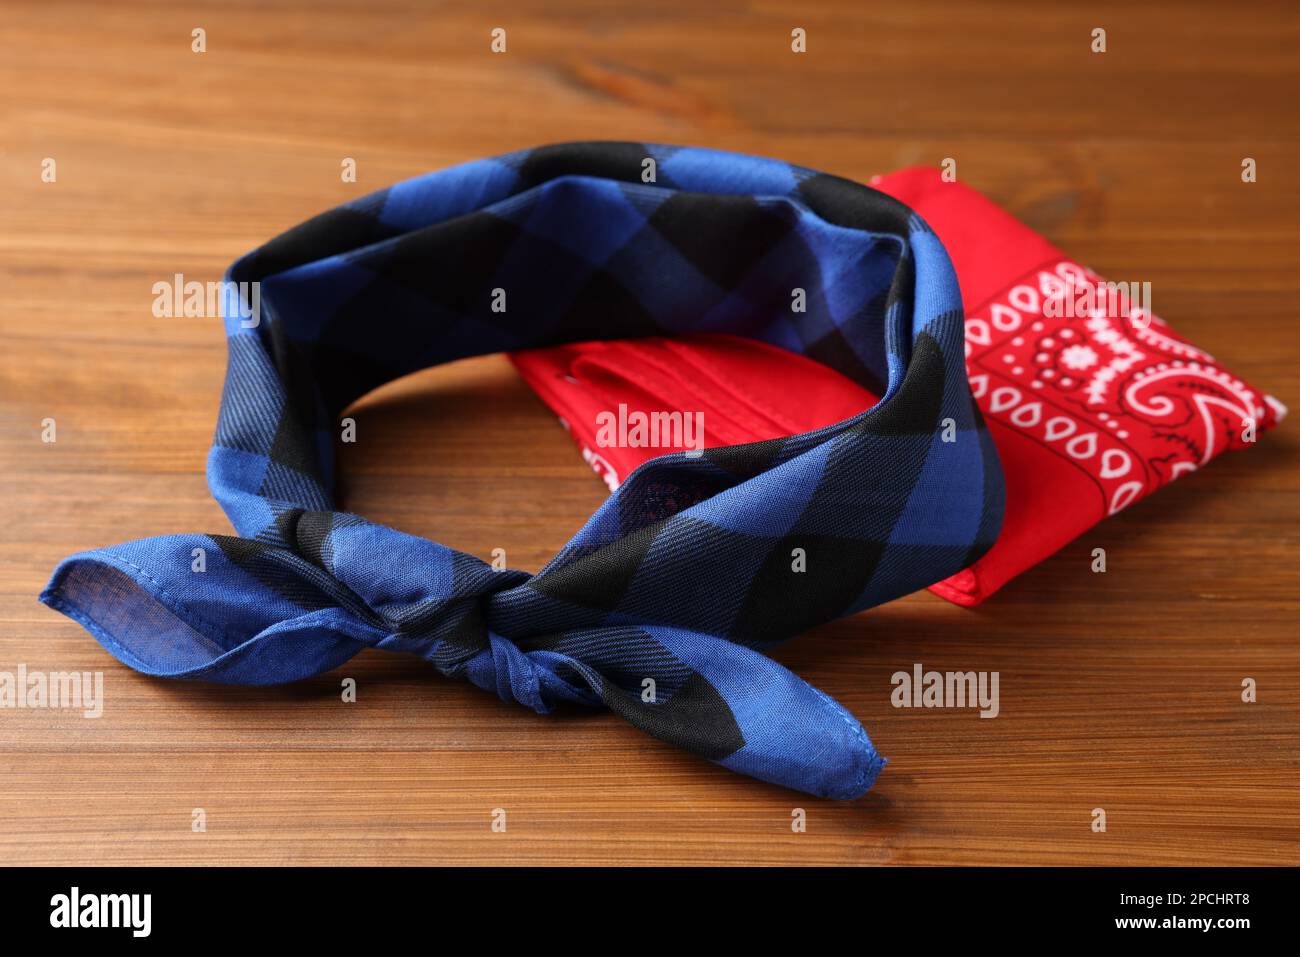 Tied and folded bandanas with different patterns on wooden table Stock Photo